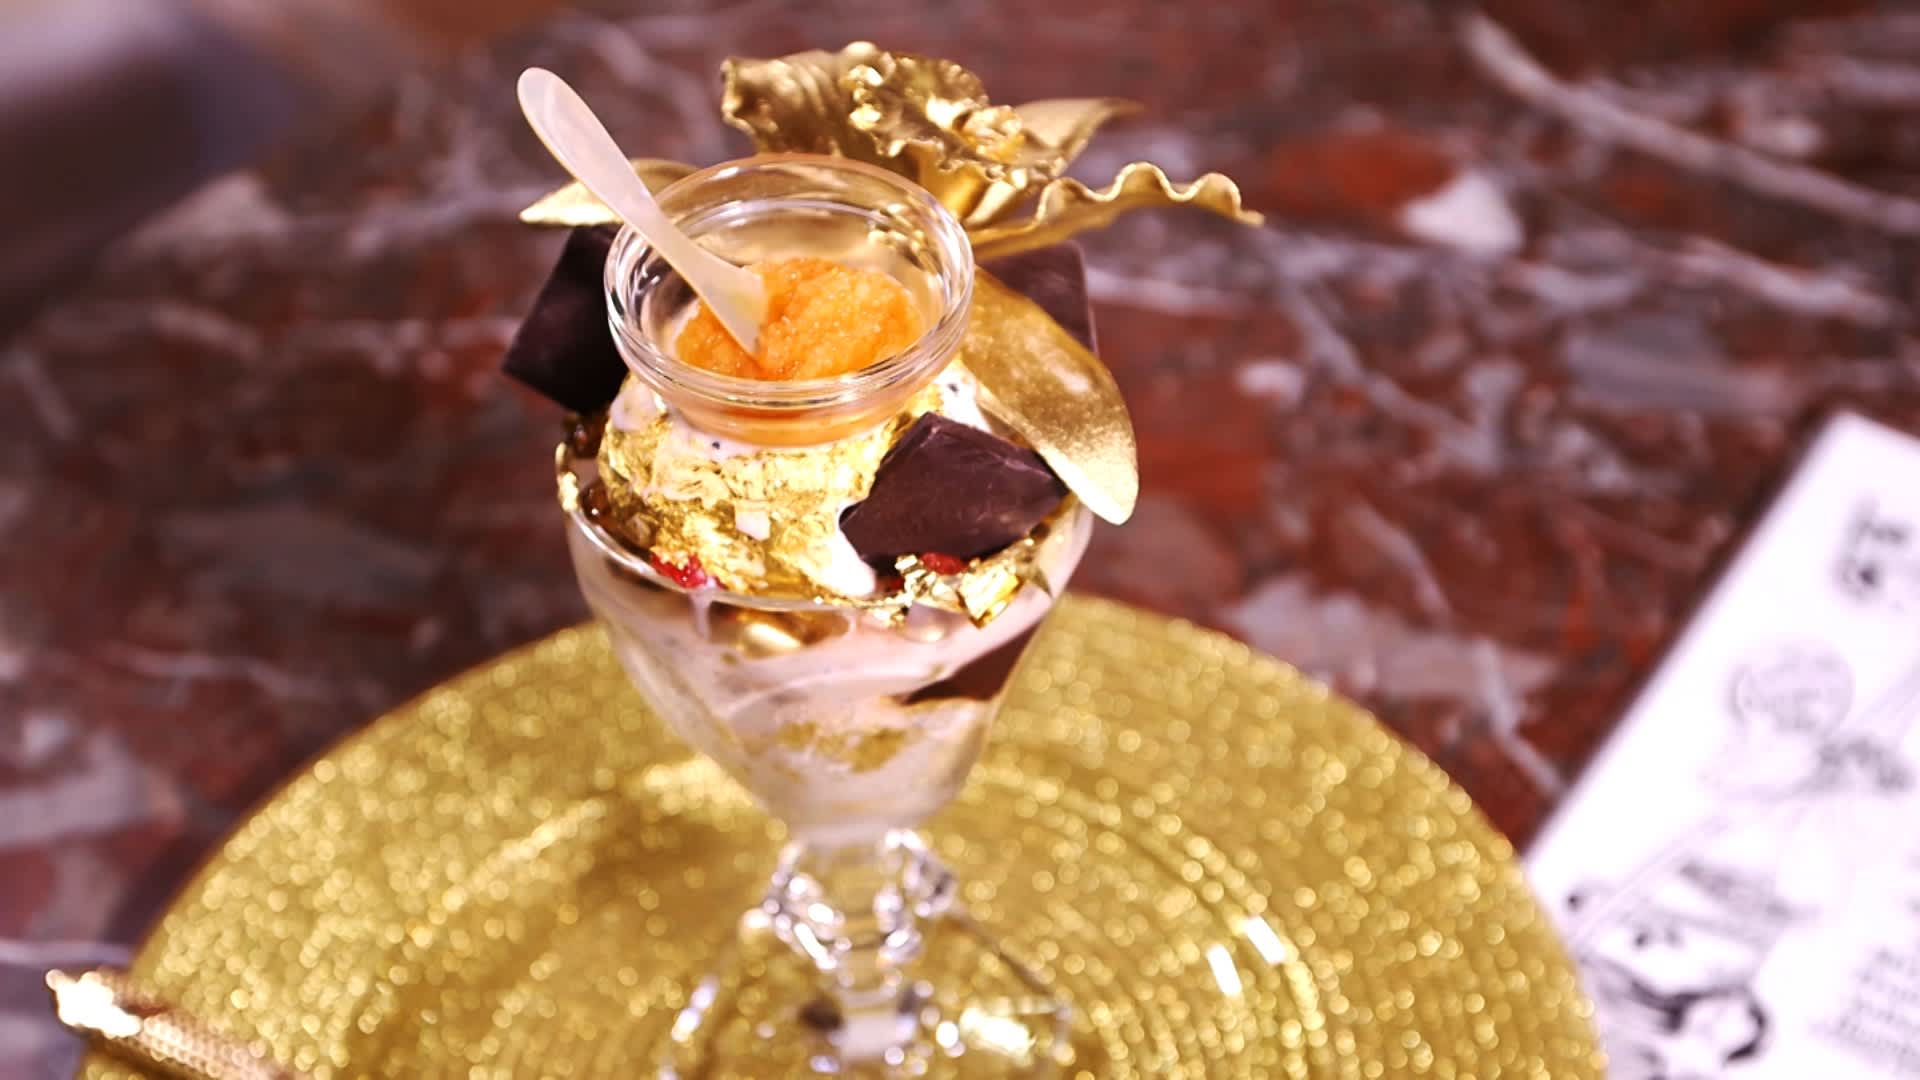 The world's priciest foods - Edible gold leaf (1) - Small Business